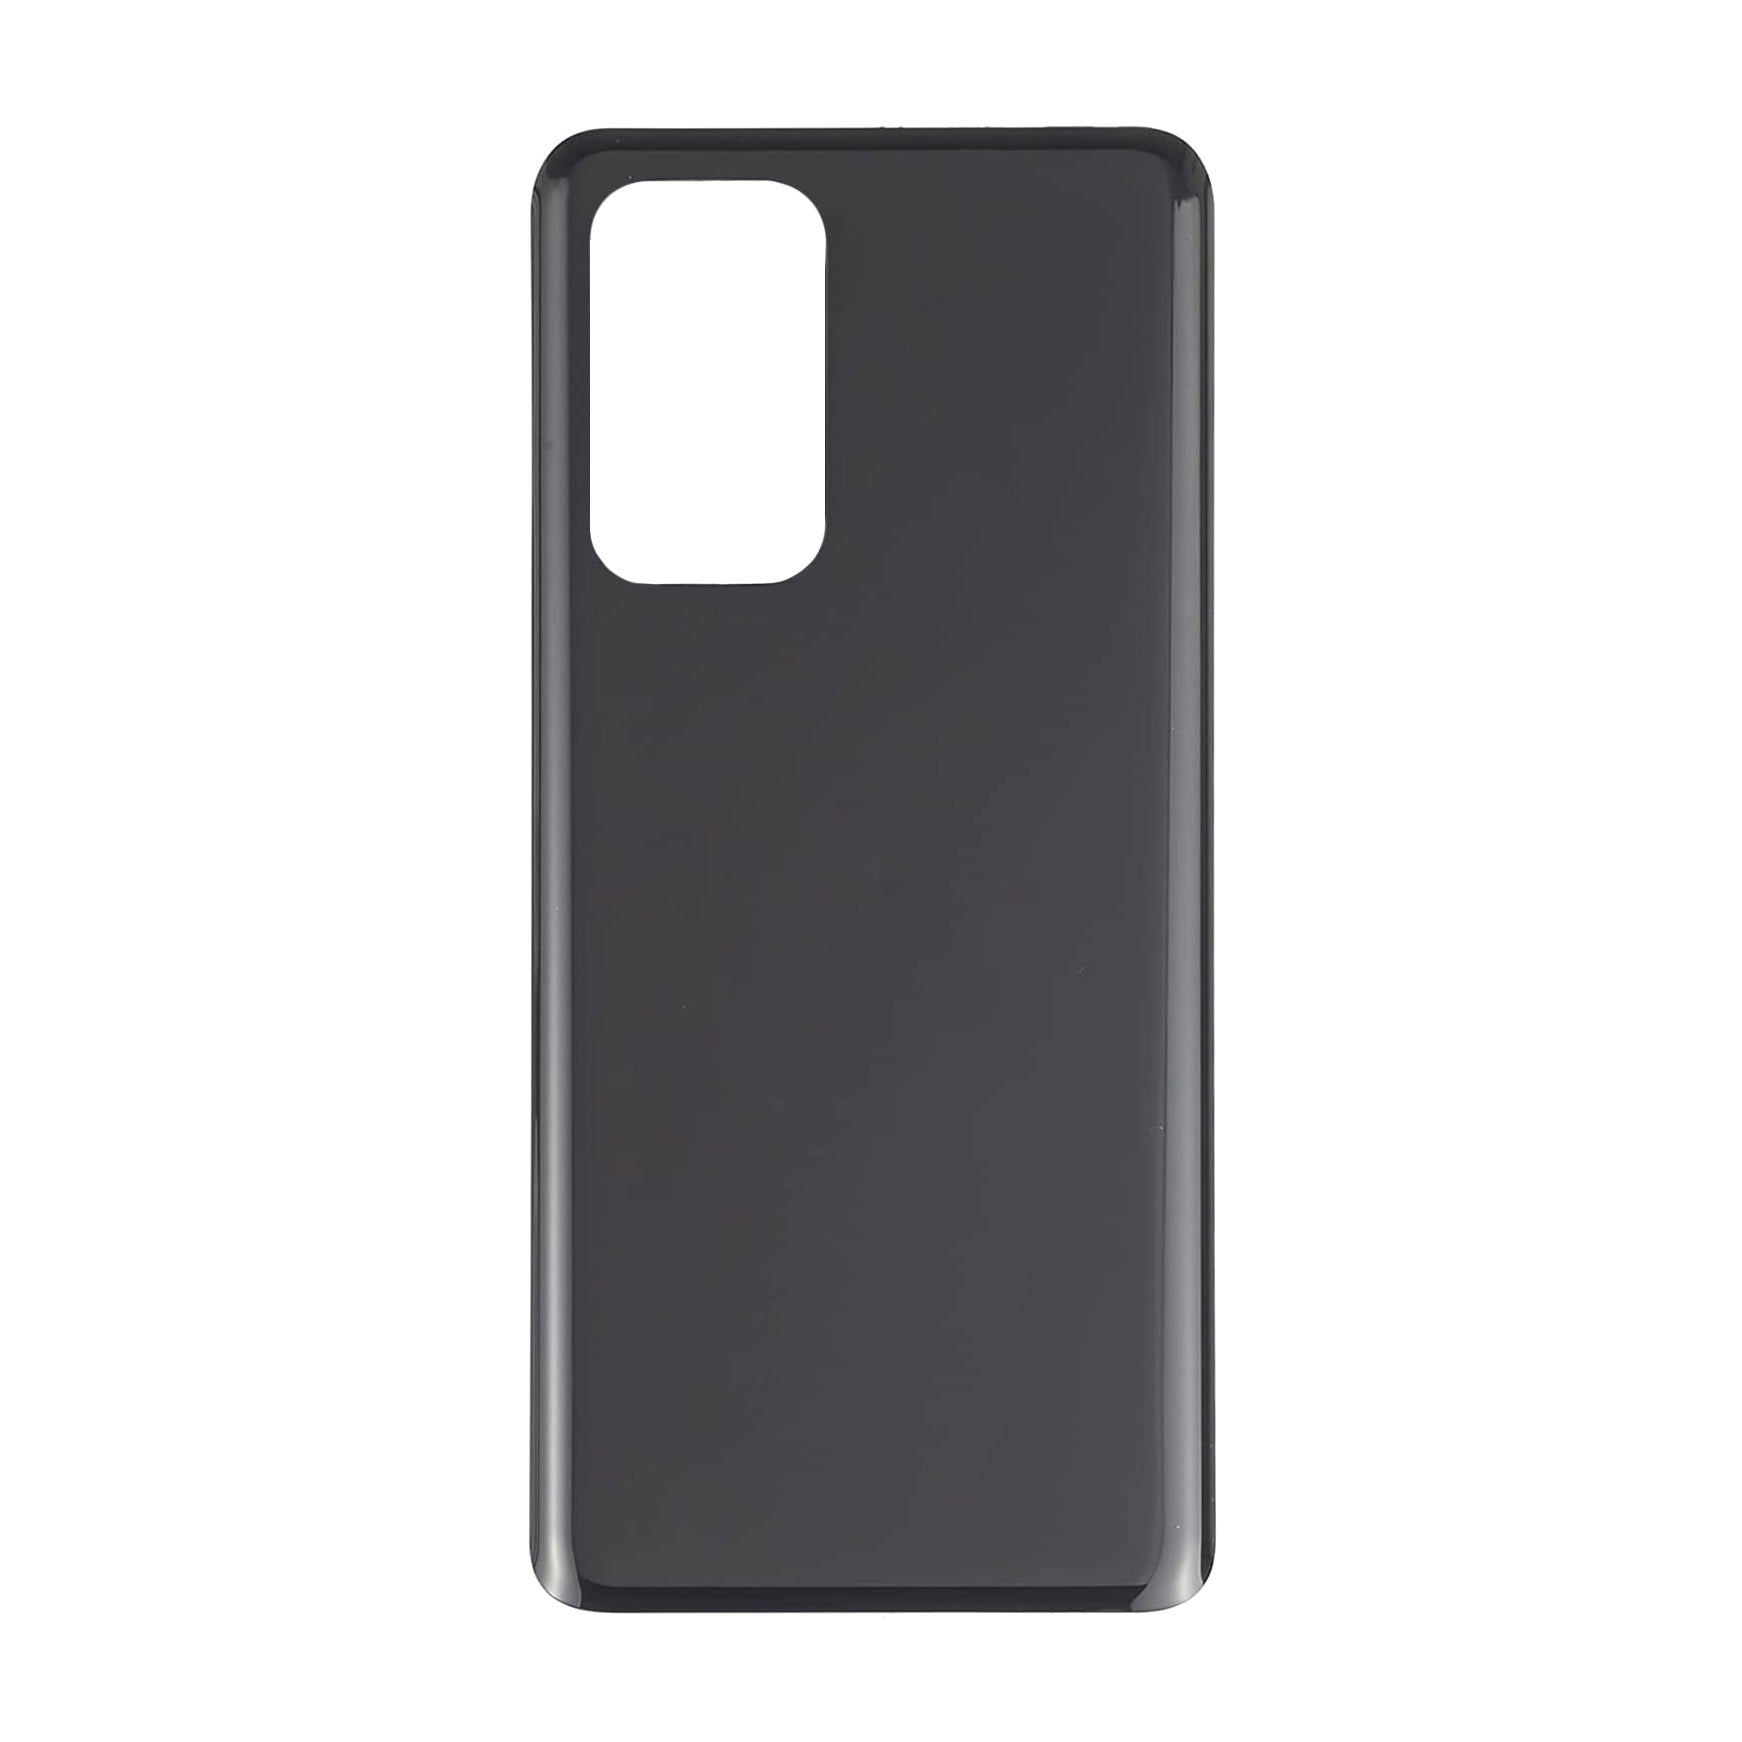 Replacement Rear Glass For OnePlus 9 Battery Cover With Adhesive - Black-Mobile Phone Parts-First Help Tech